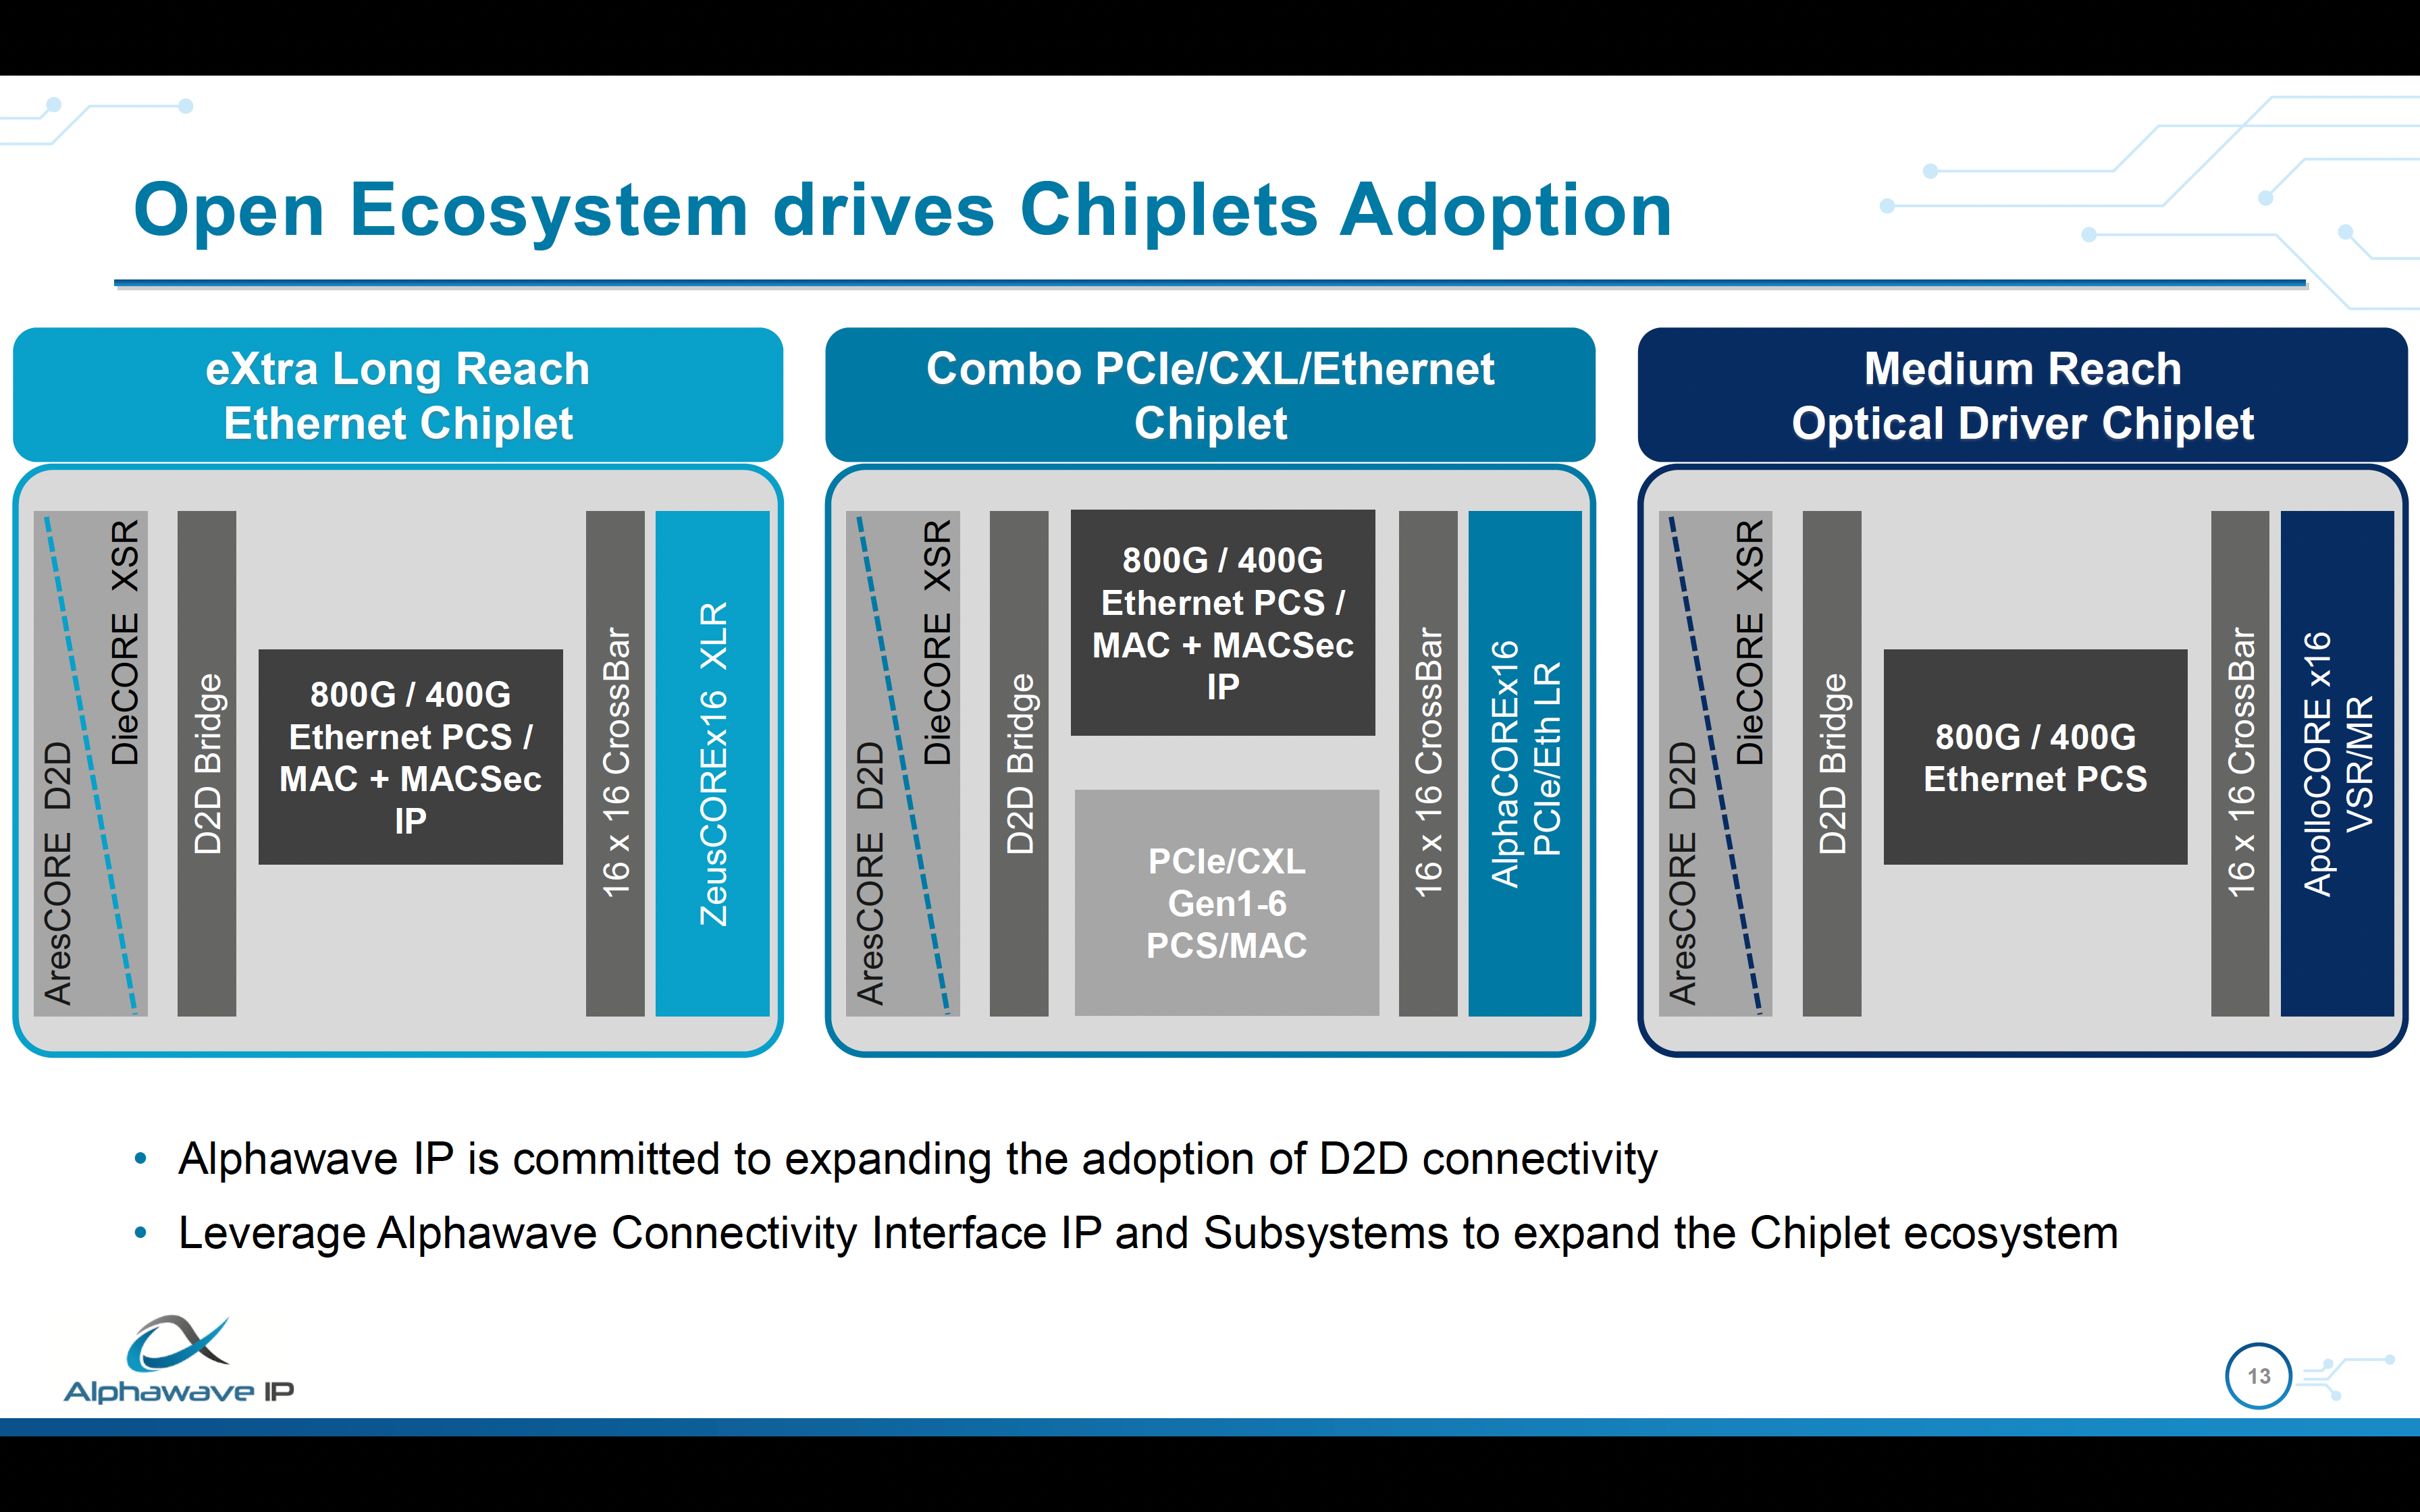 Open Ecosystem Drives Chiplets Adoption